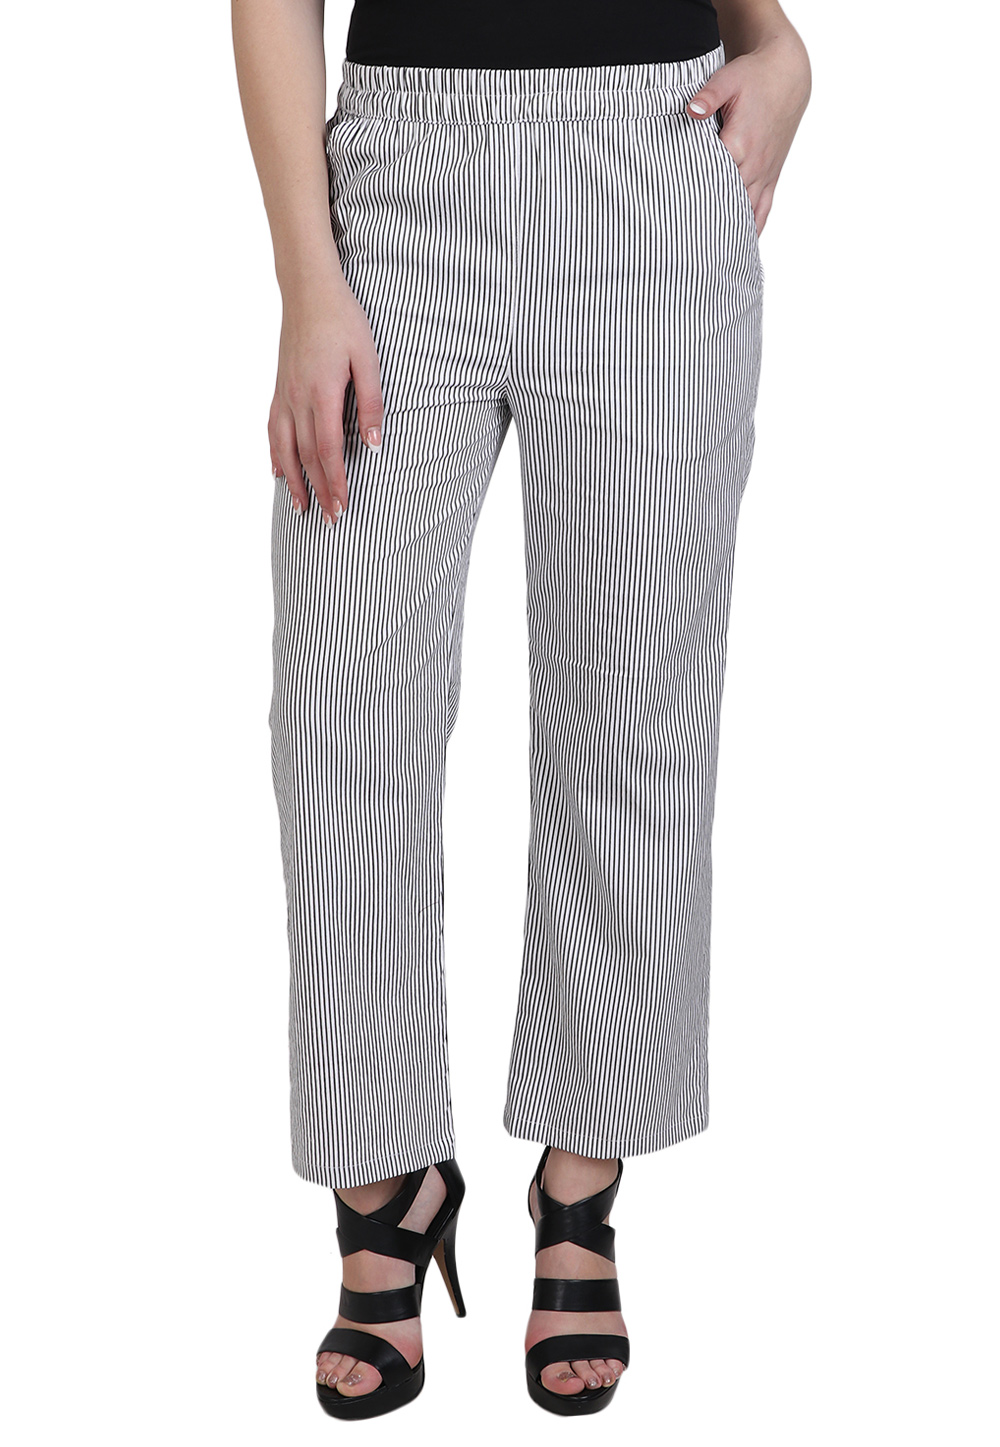 Buy Off White Lace Pants Online - Aarke International Store View